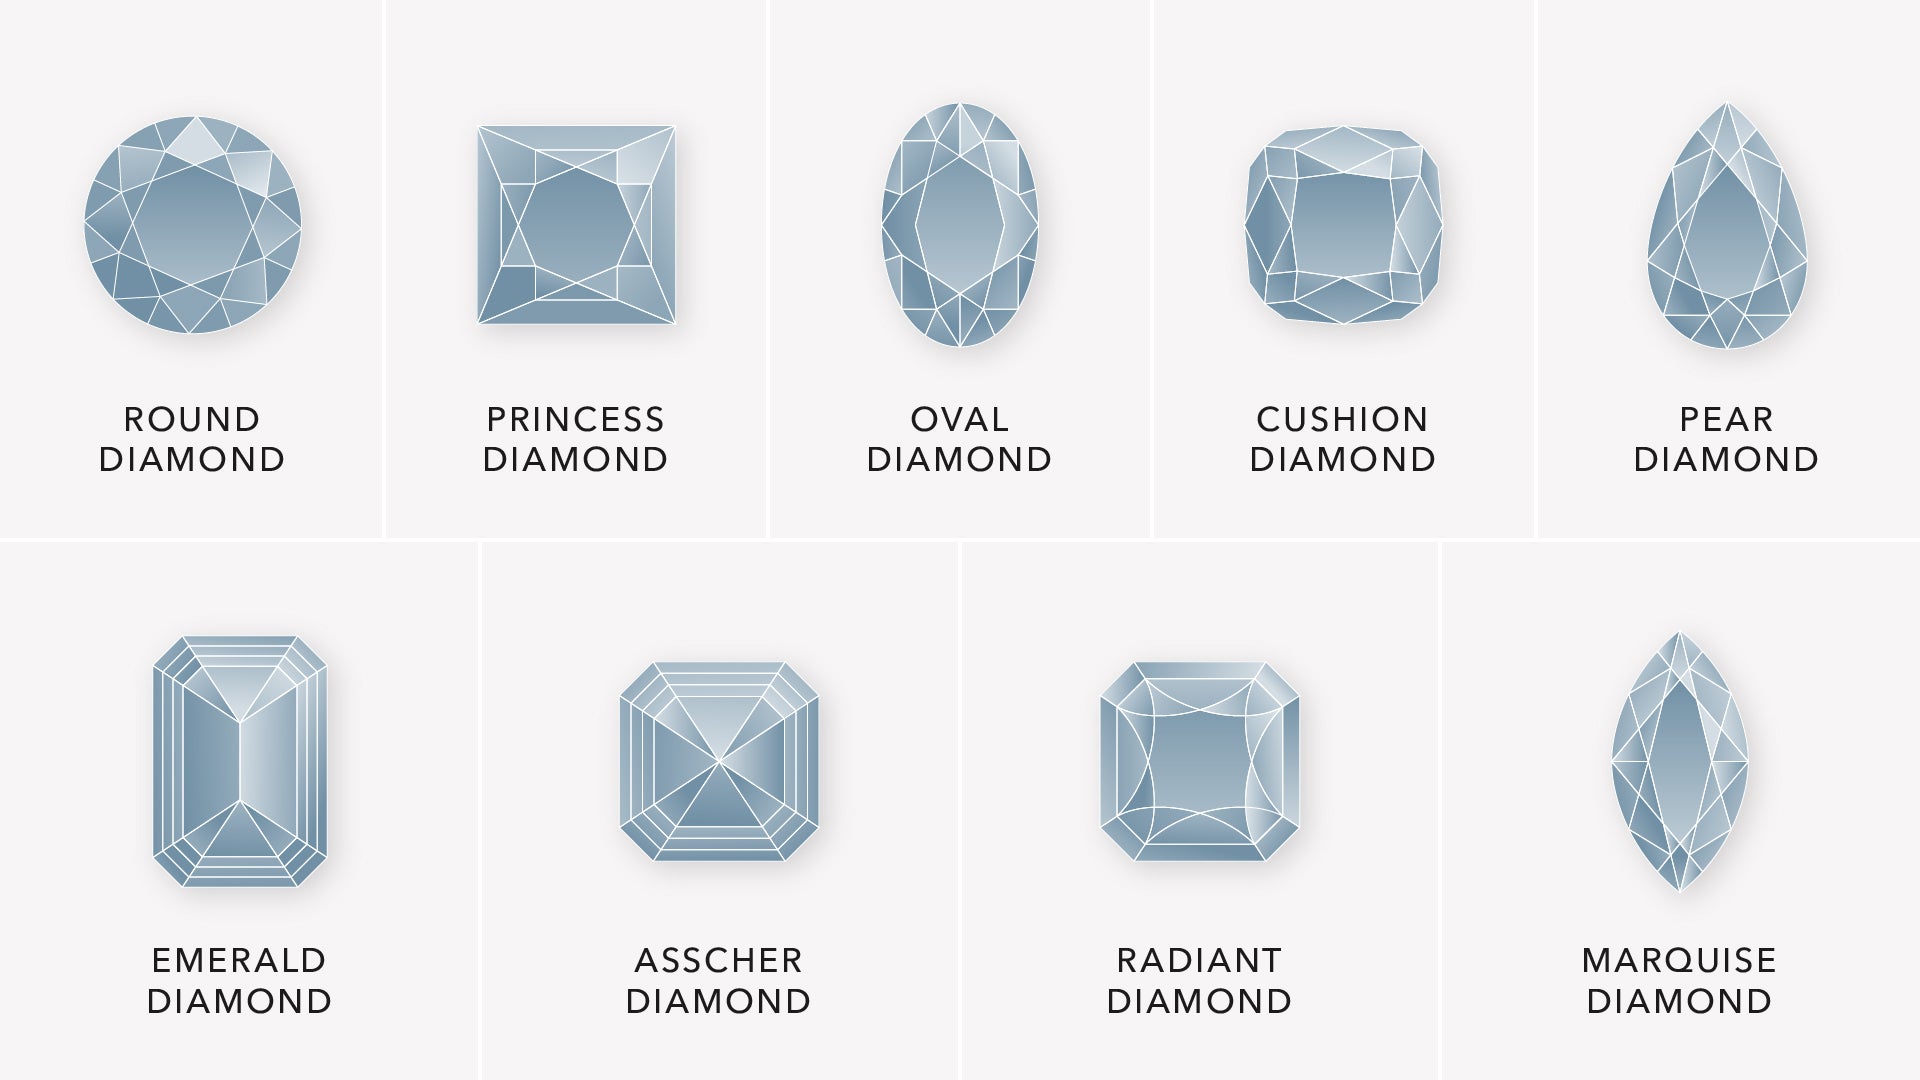 A Guide to the Different Diamond Shapes